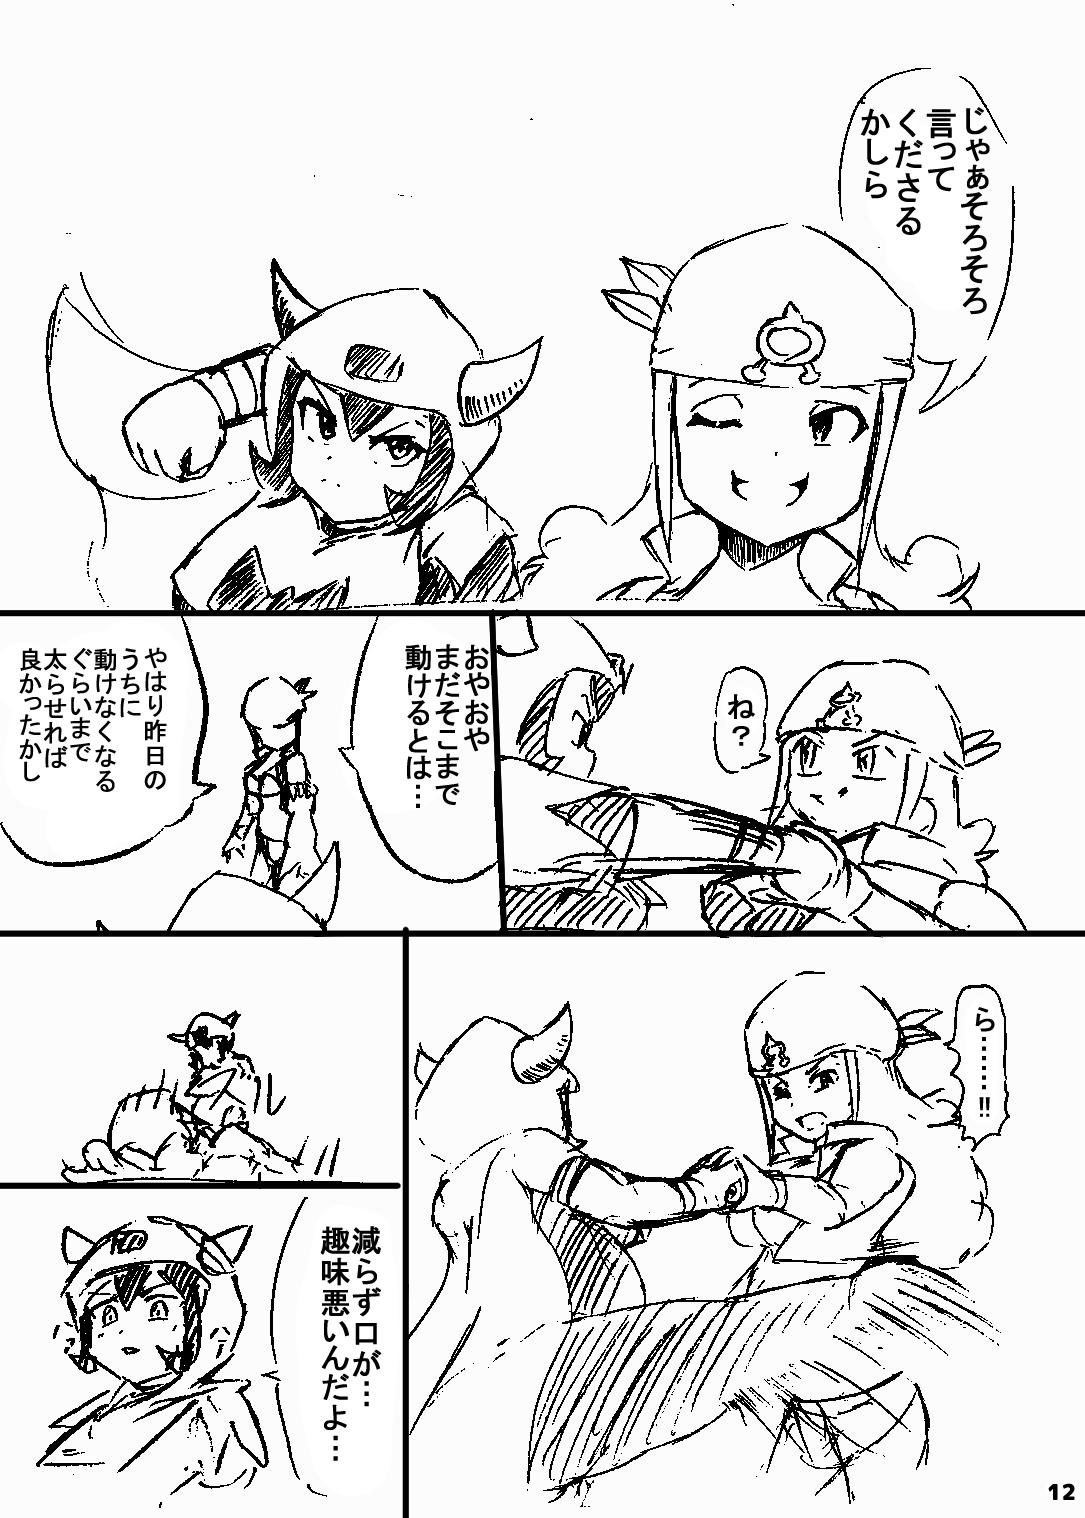 Big Dildo ポケスペカガリ肥満化漫画 - Pokemon Realitykings - Page 11